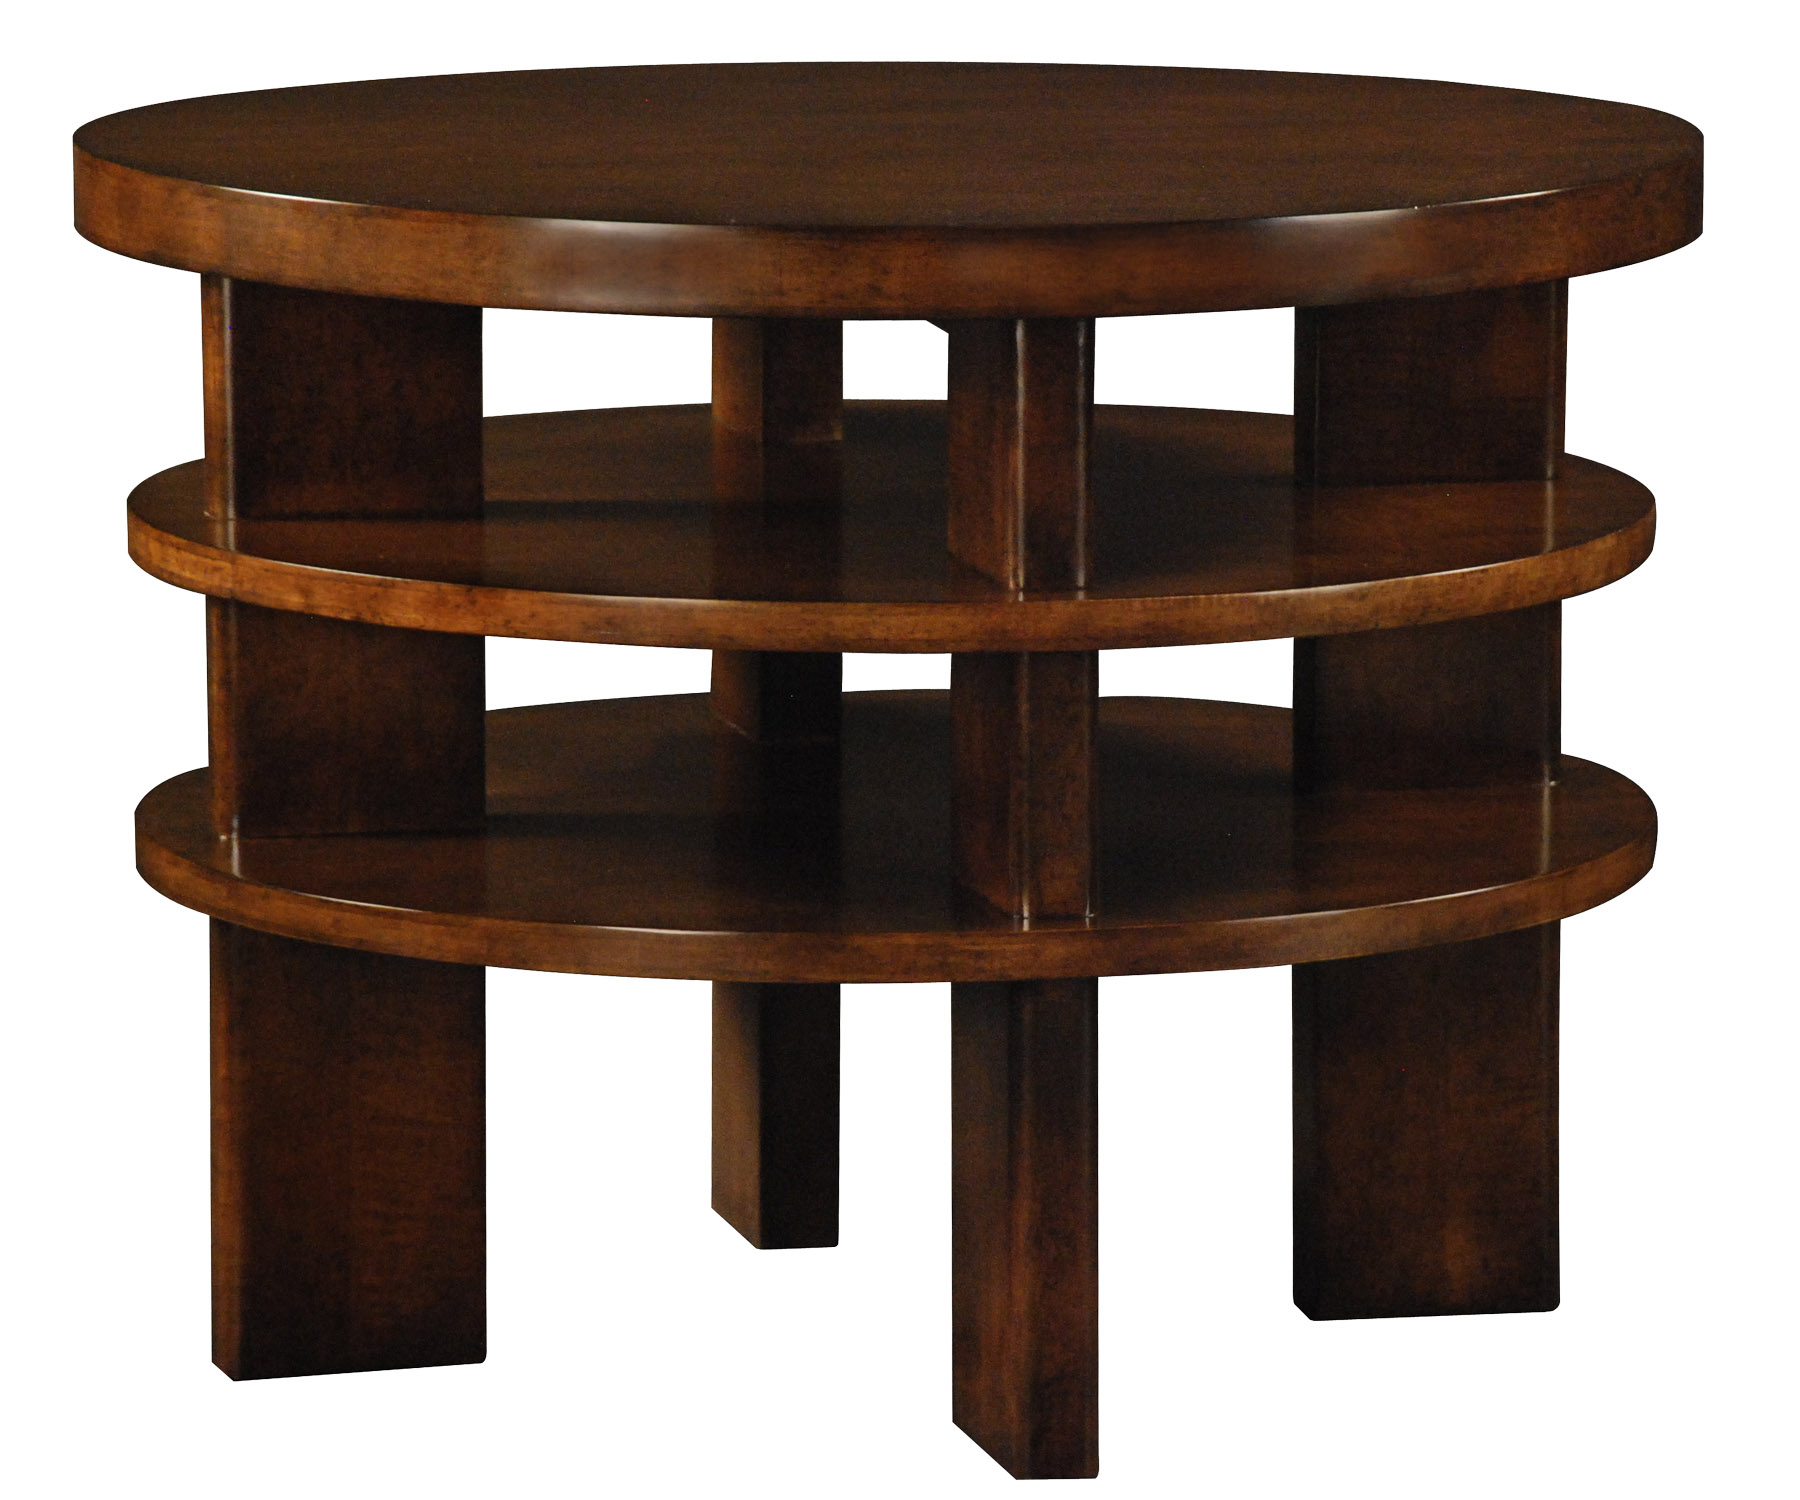 Dubois contemporary modern round side table with two lower shelves by Woodland furniture in Idaho Falls